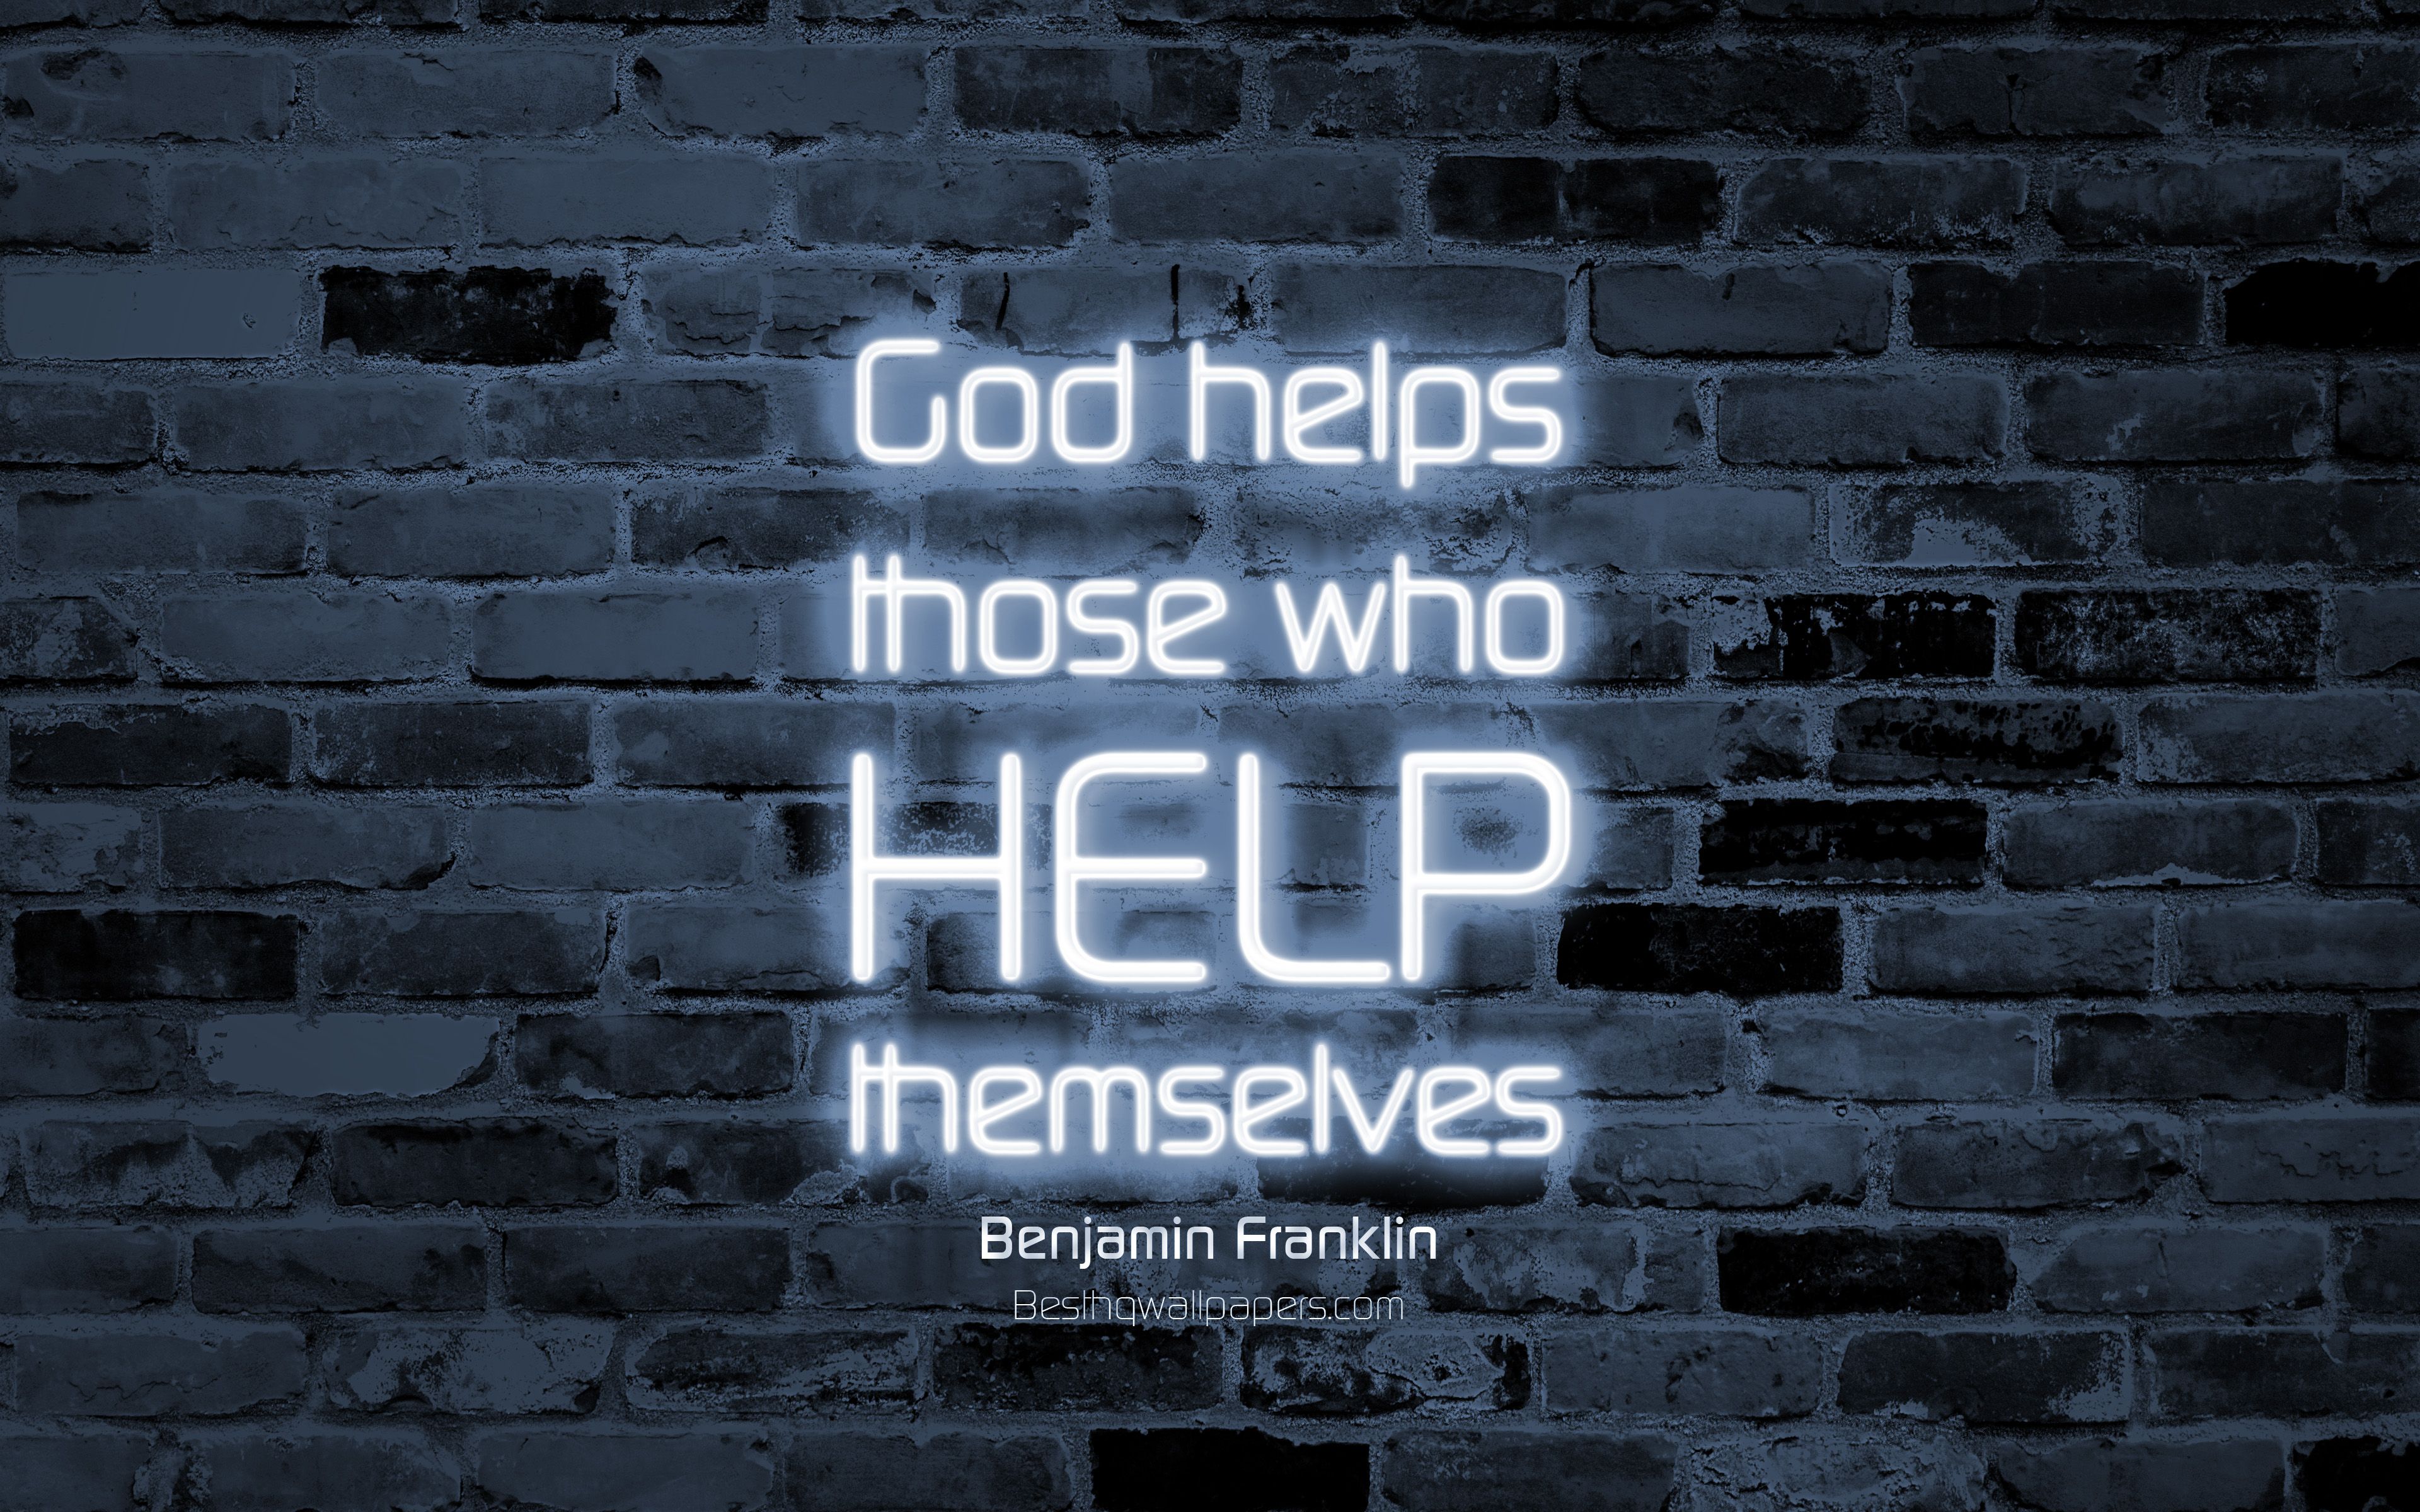 Download wallpaper God helps those who help themselves, 4k, gray brick wall, Benjamin Franklin Quotes, neon text, inspiration, Benjamin Franklin, business quotes for desktop with resolution 3840x2400. High Quality HD picture wallpaper